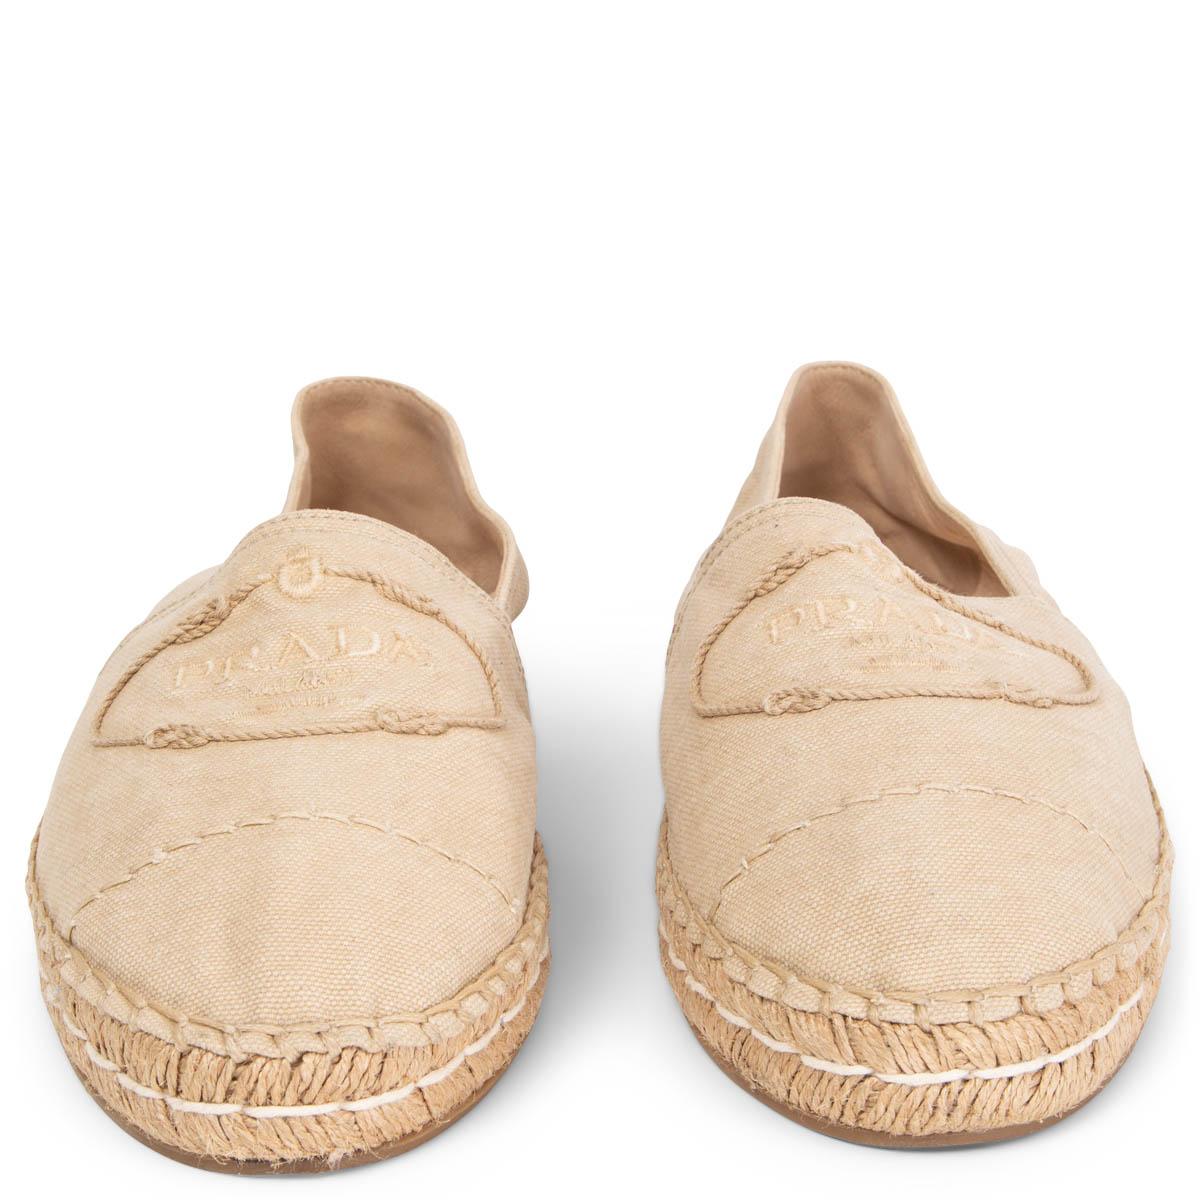 100% authentic Prada Espadrilles made from durable and lightweight light beige cotton canvas that are set upon traditional braided jute soles with the Prada logo, surrounded by knotted stitching. Have been worn once or twice and are in excellent